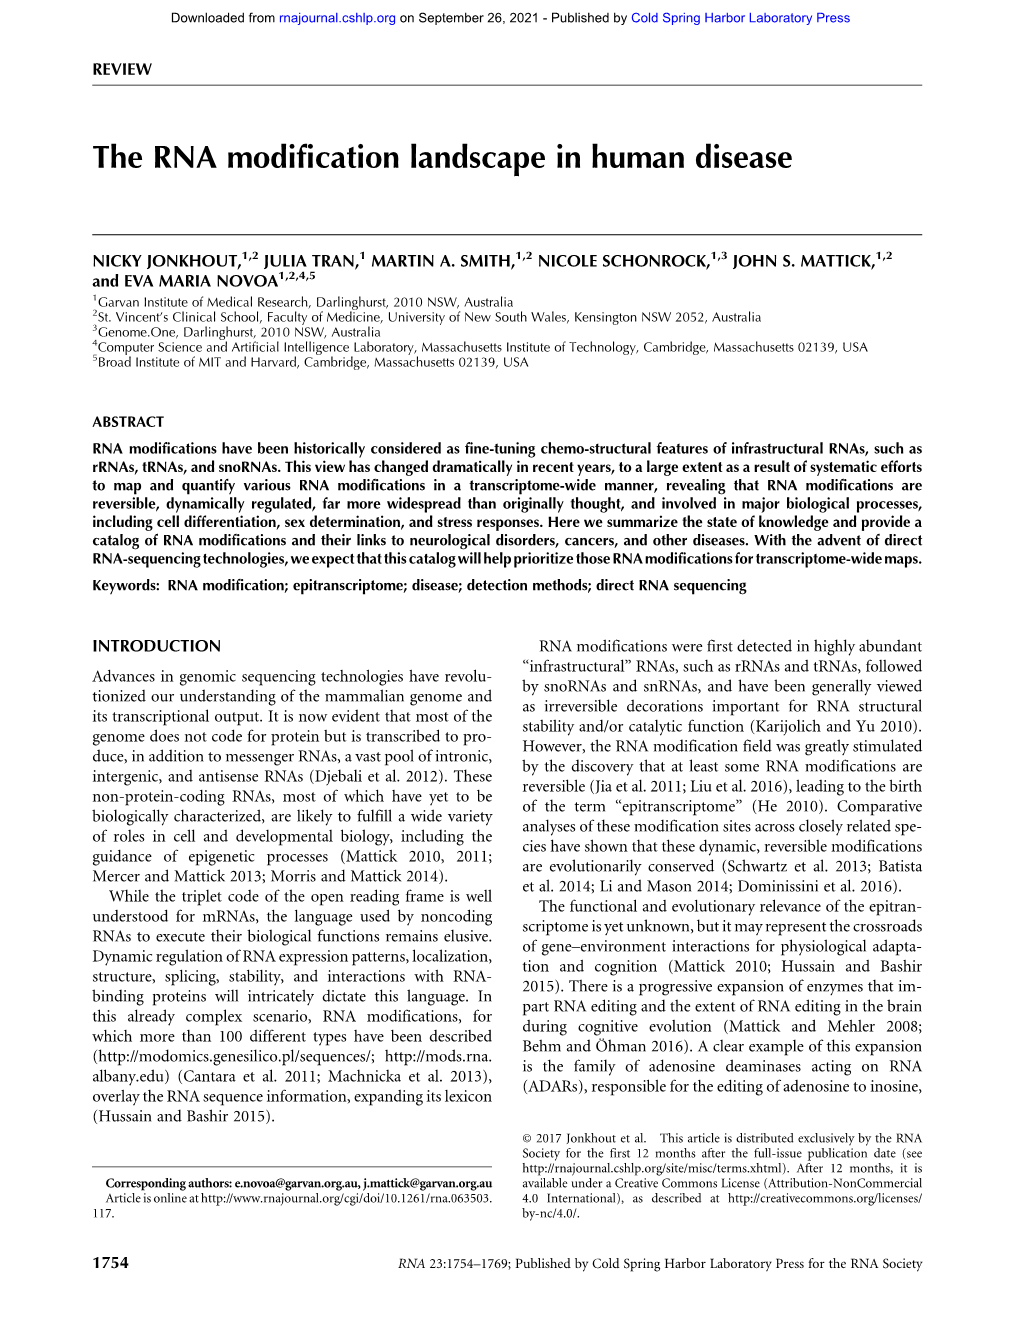 The RNA Modification Landscape in Human Disease